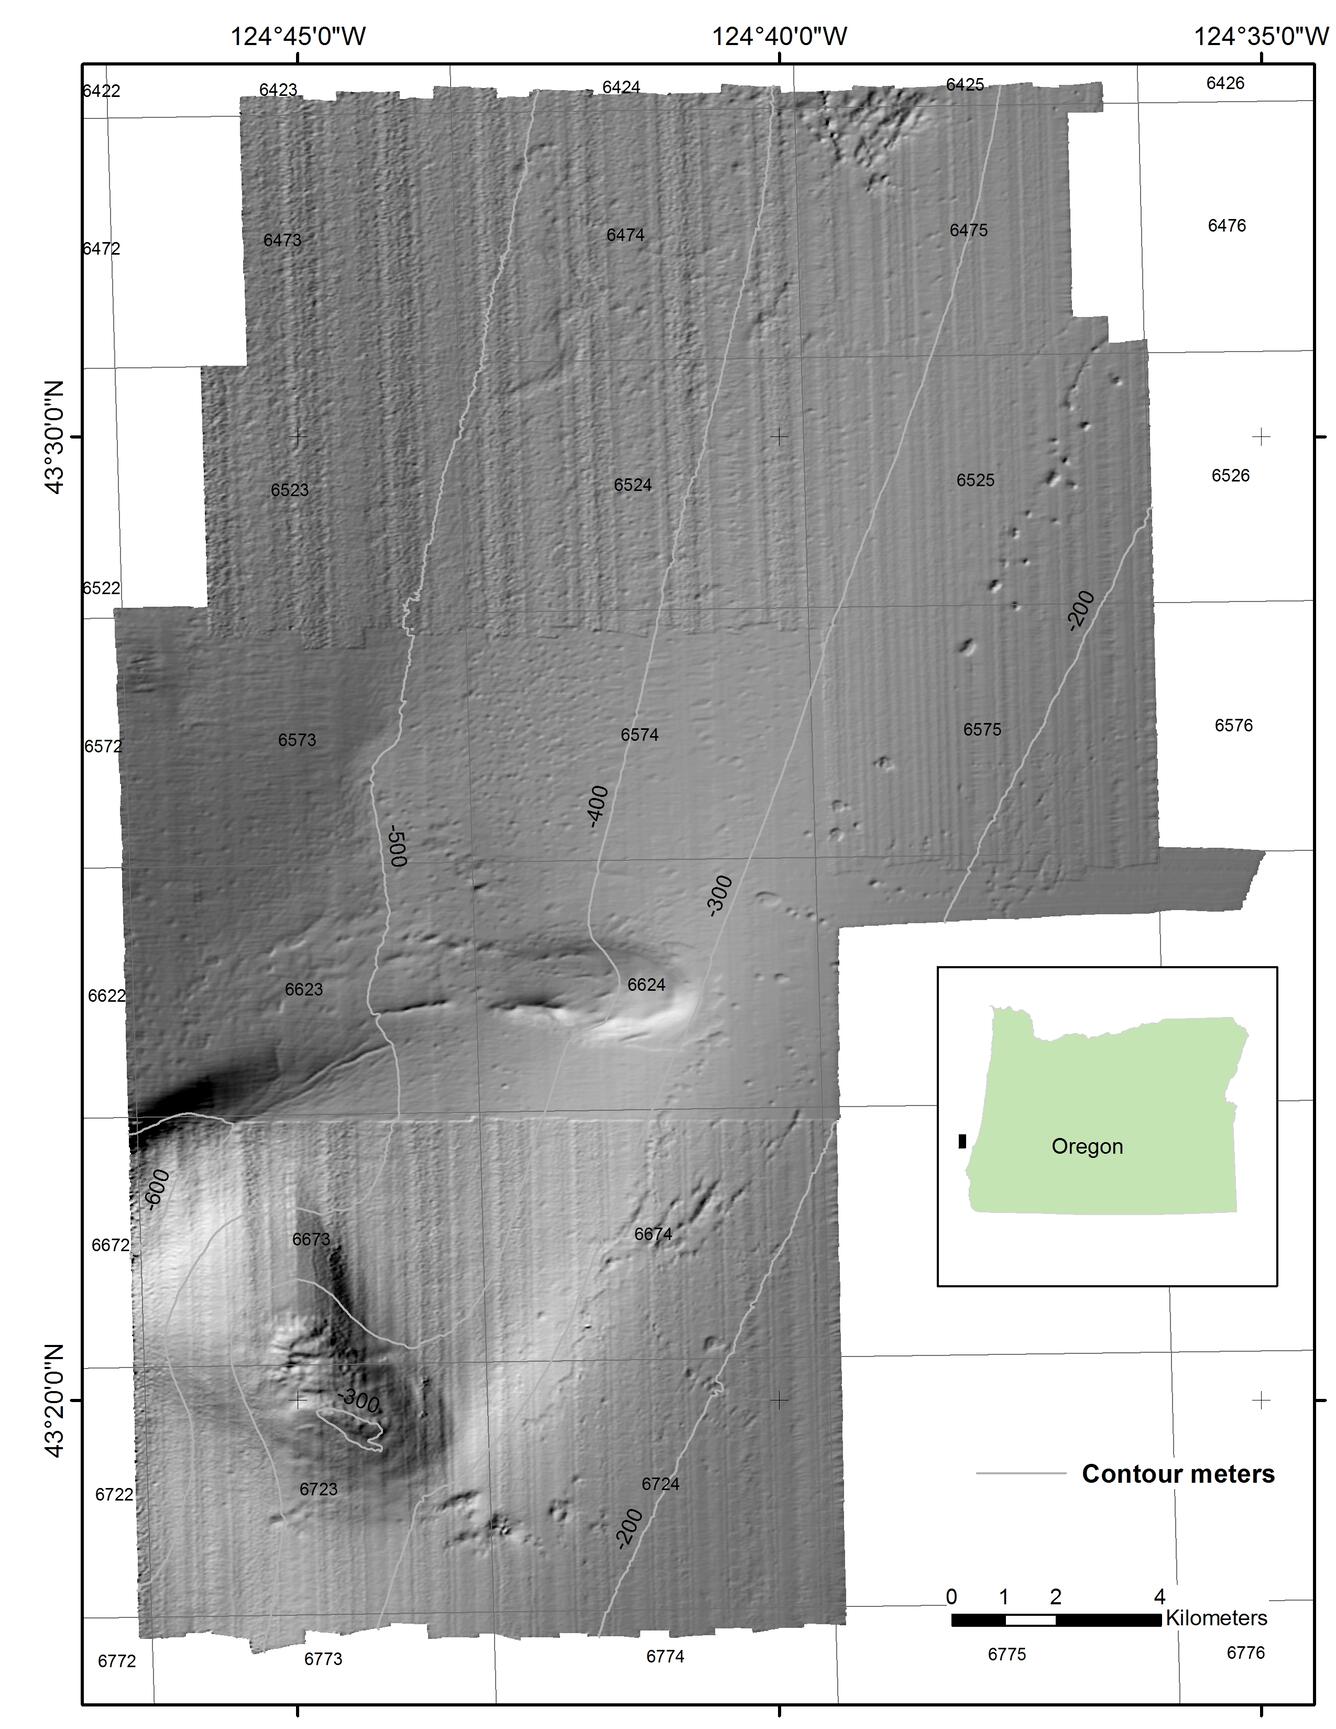 Illustration of bathymetry hillshade offshore of Oregon shows the contours of the seafloor in shades of gray.